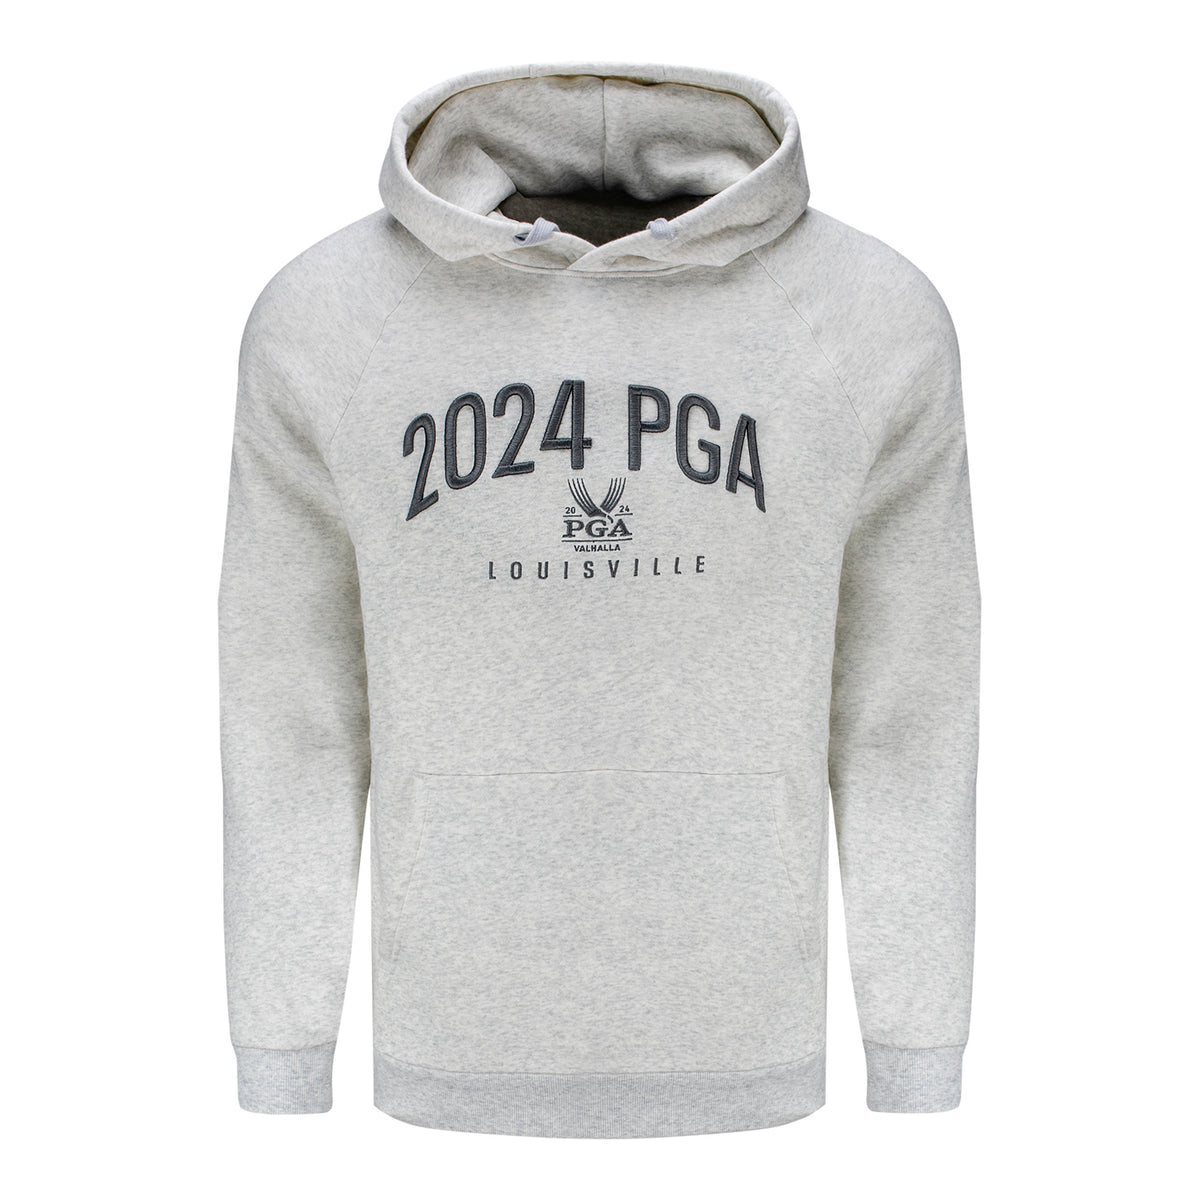 Under Armour 2024 PGA Championship Fleece Hoodie with Applique in Light Heather Grey - Front View